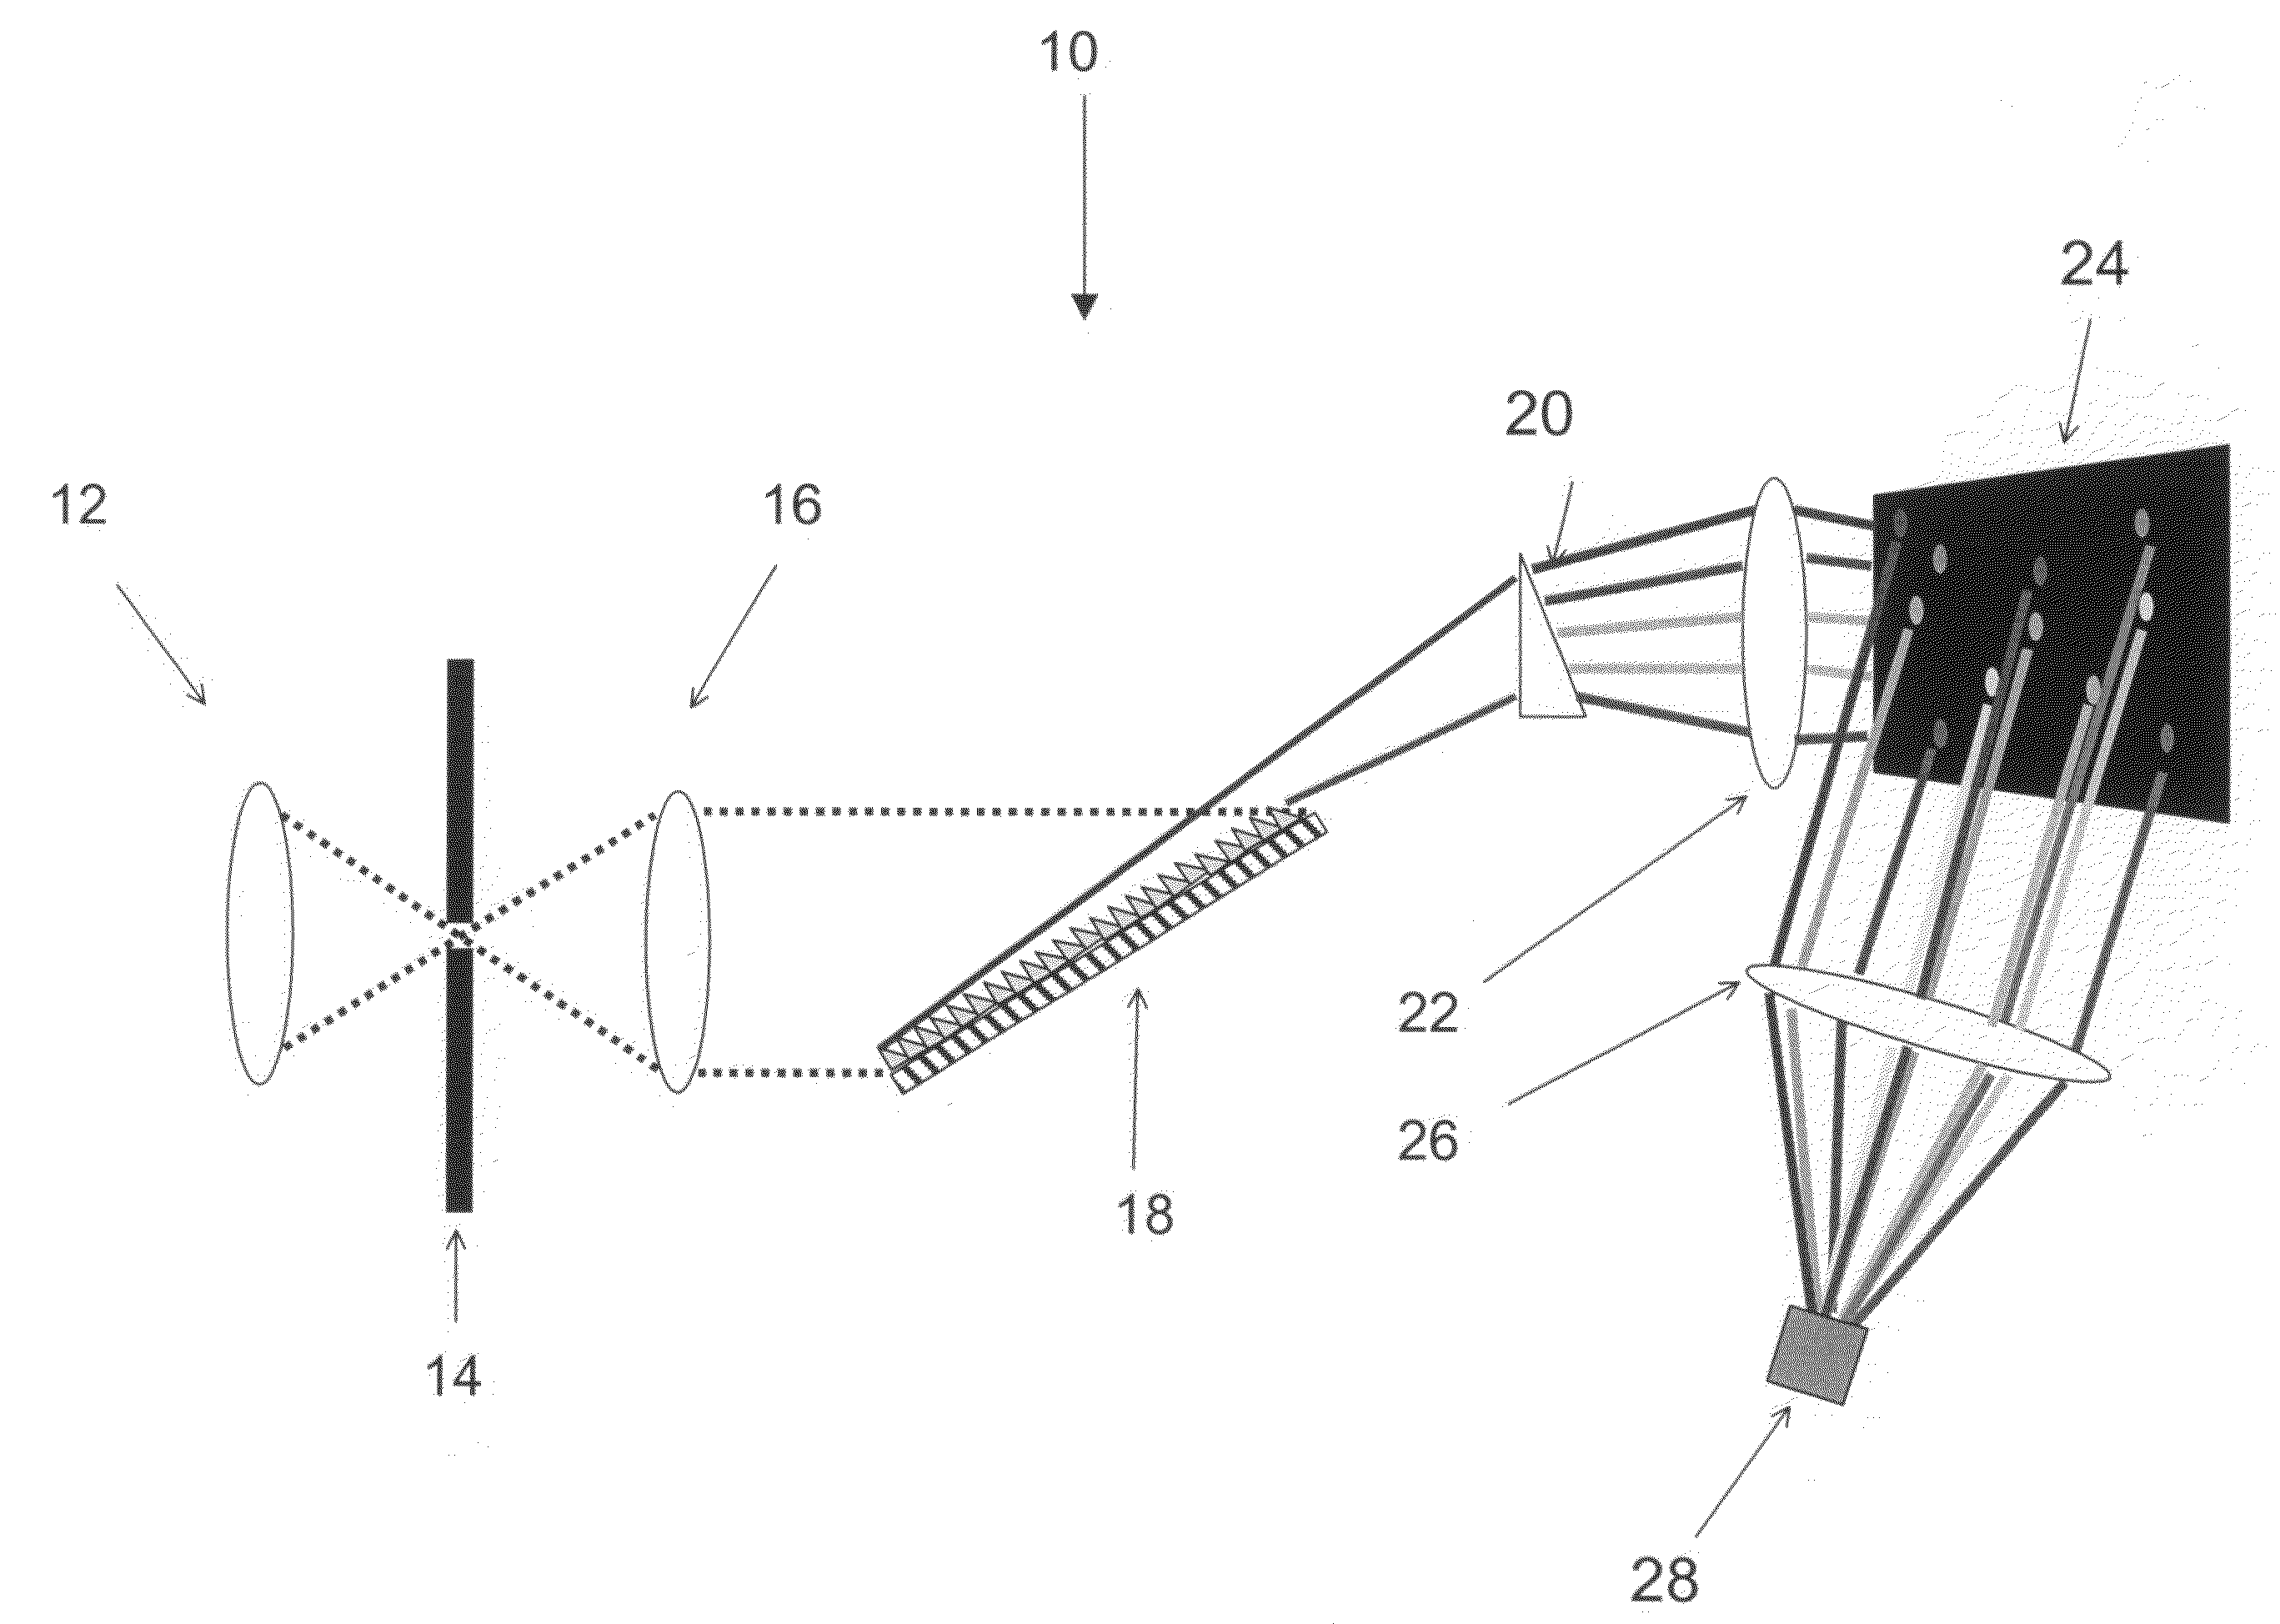 Spectrometers using 2-dimensional microelectromechanical digital micromirror devices